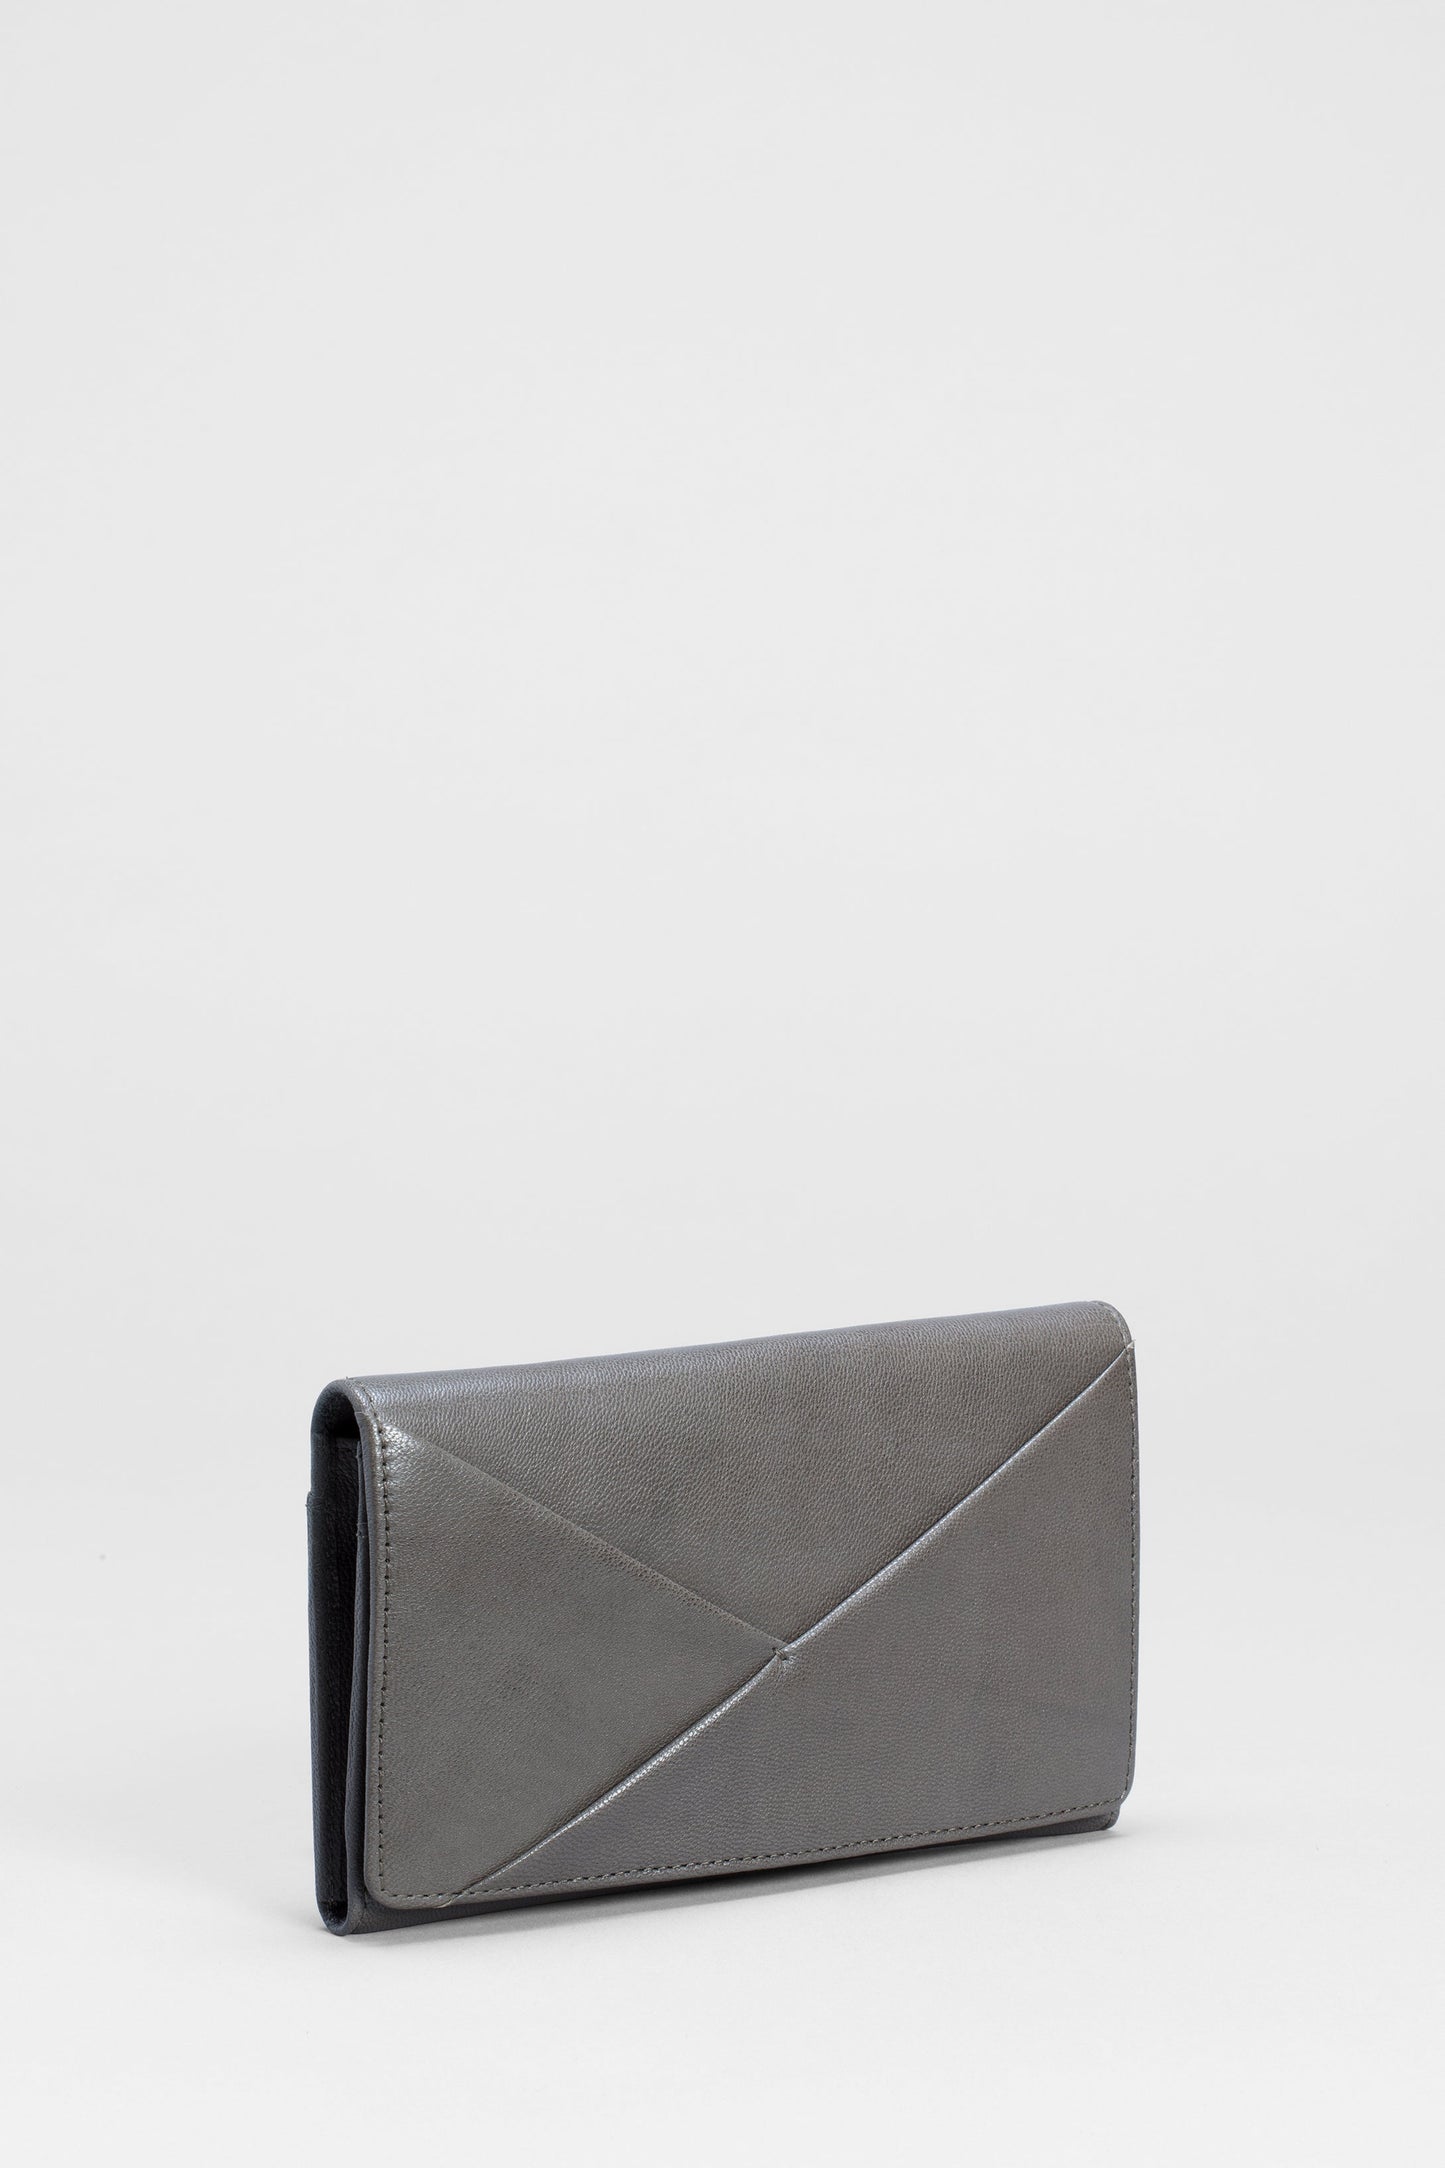 Flyta Remnant Leather Wallet Front | SMOKE